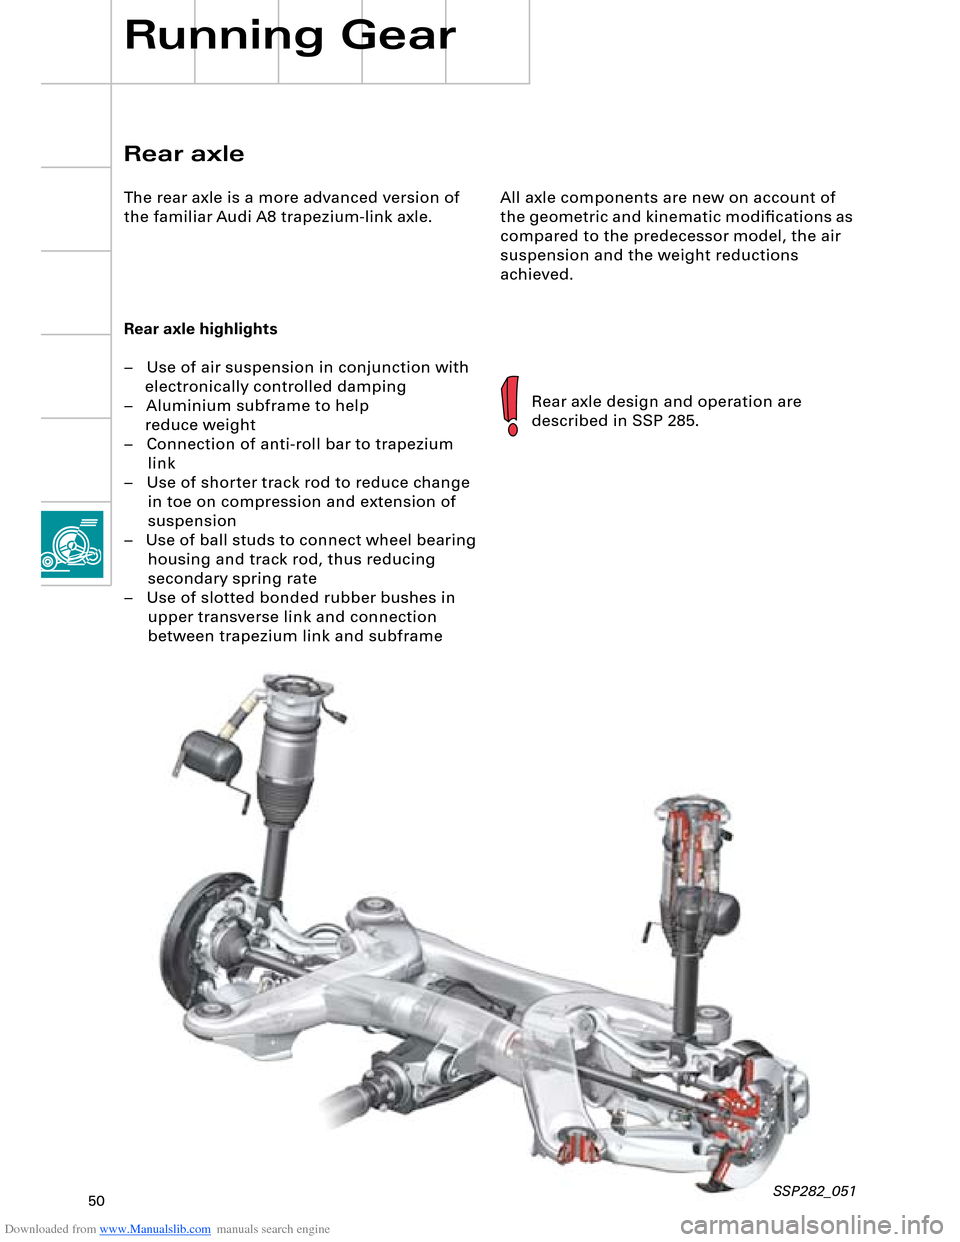 AUDI A8 2003 D3 / 2.G Technical Features Manual Downloaded from www.Manualslib.com manuals search engine 50
All axle components are new on account of 
the geometric and kinematic modiﬁcations as 
compared to the predecessor model, the air 
suspen